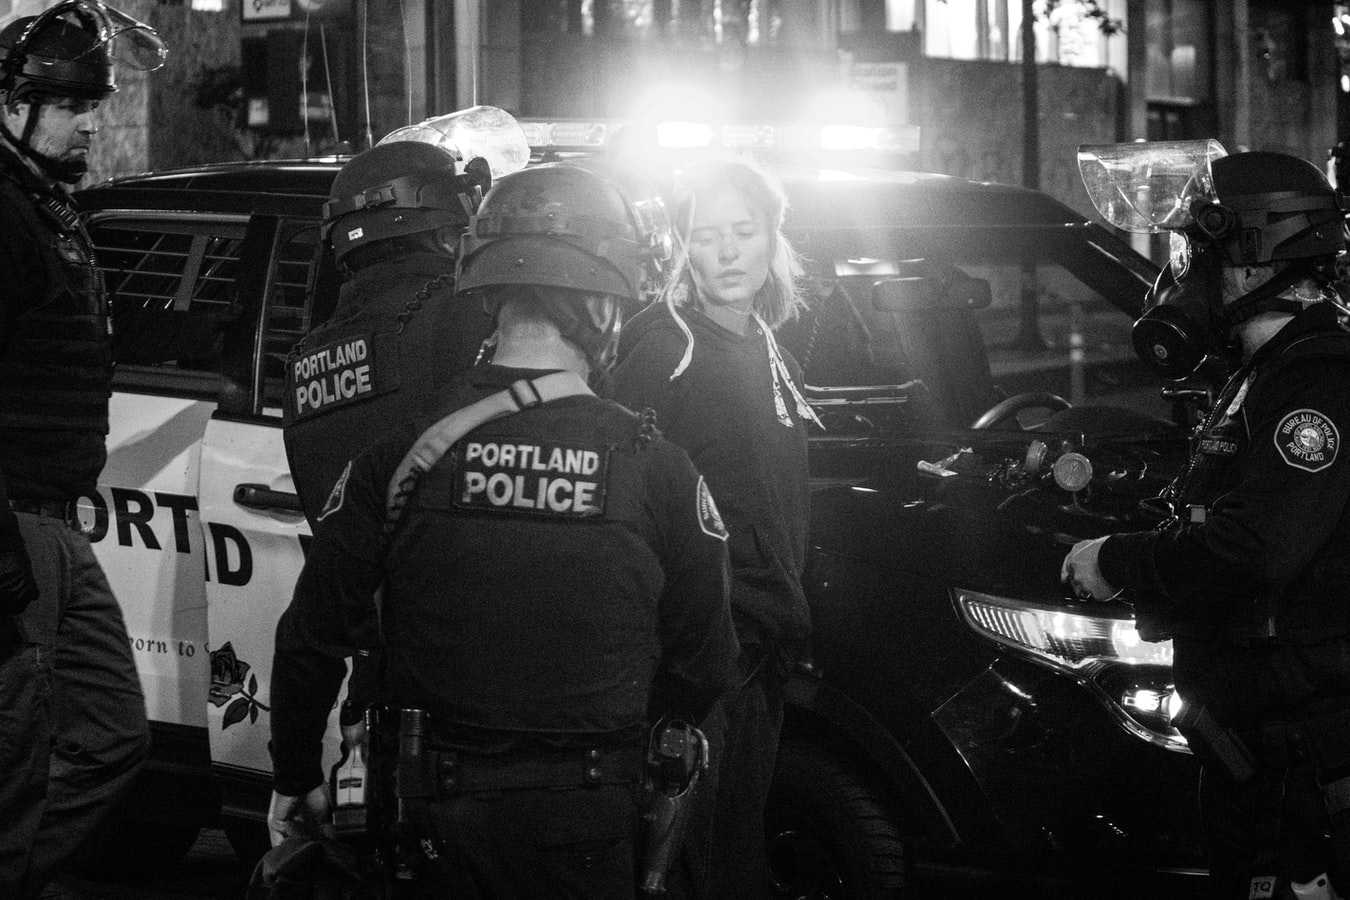 Police in Portland, Oregon arrest a young white woman.